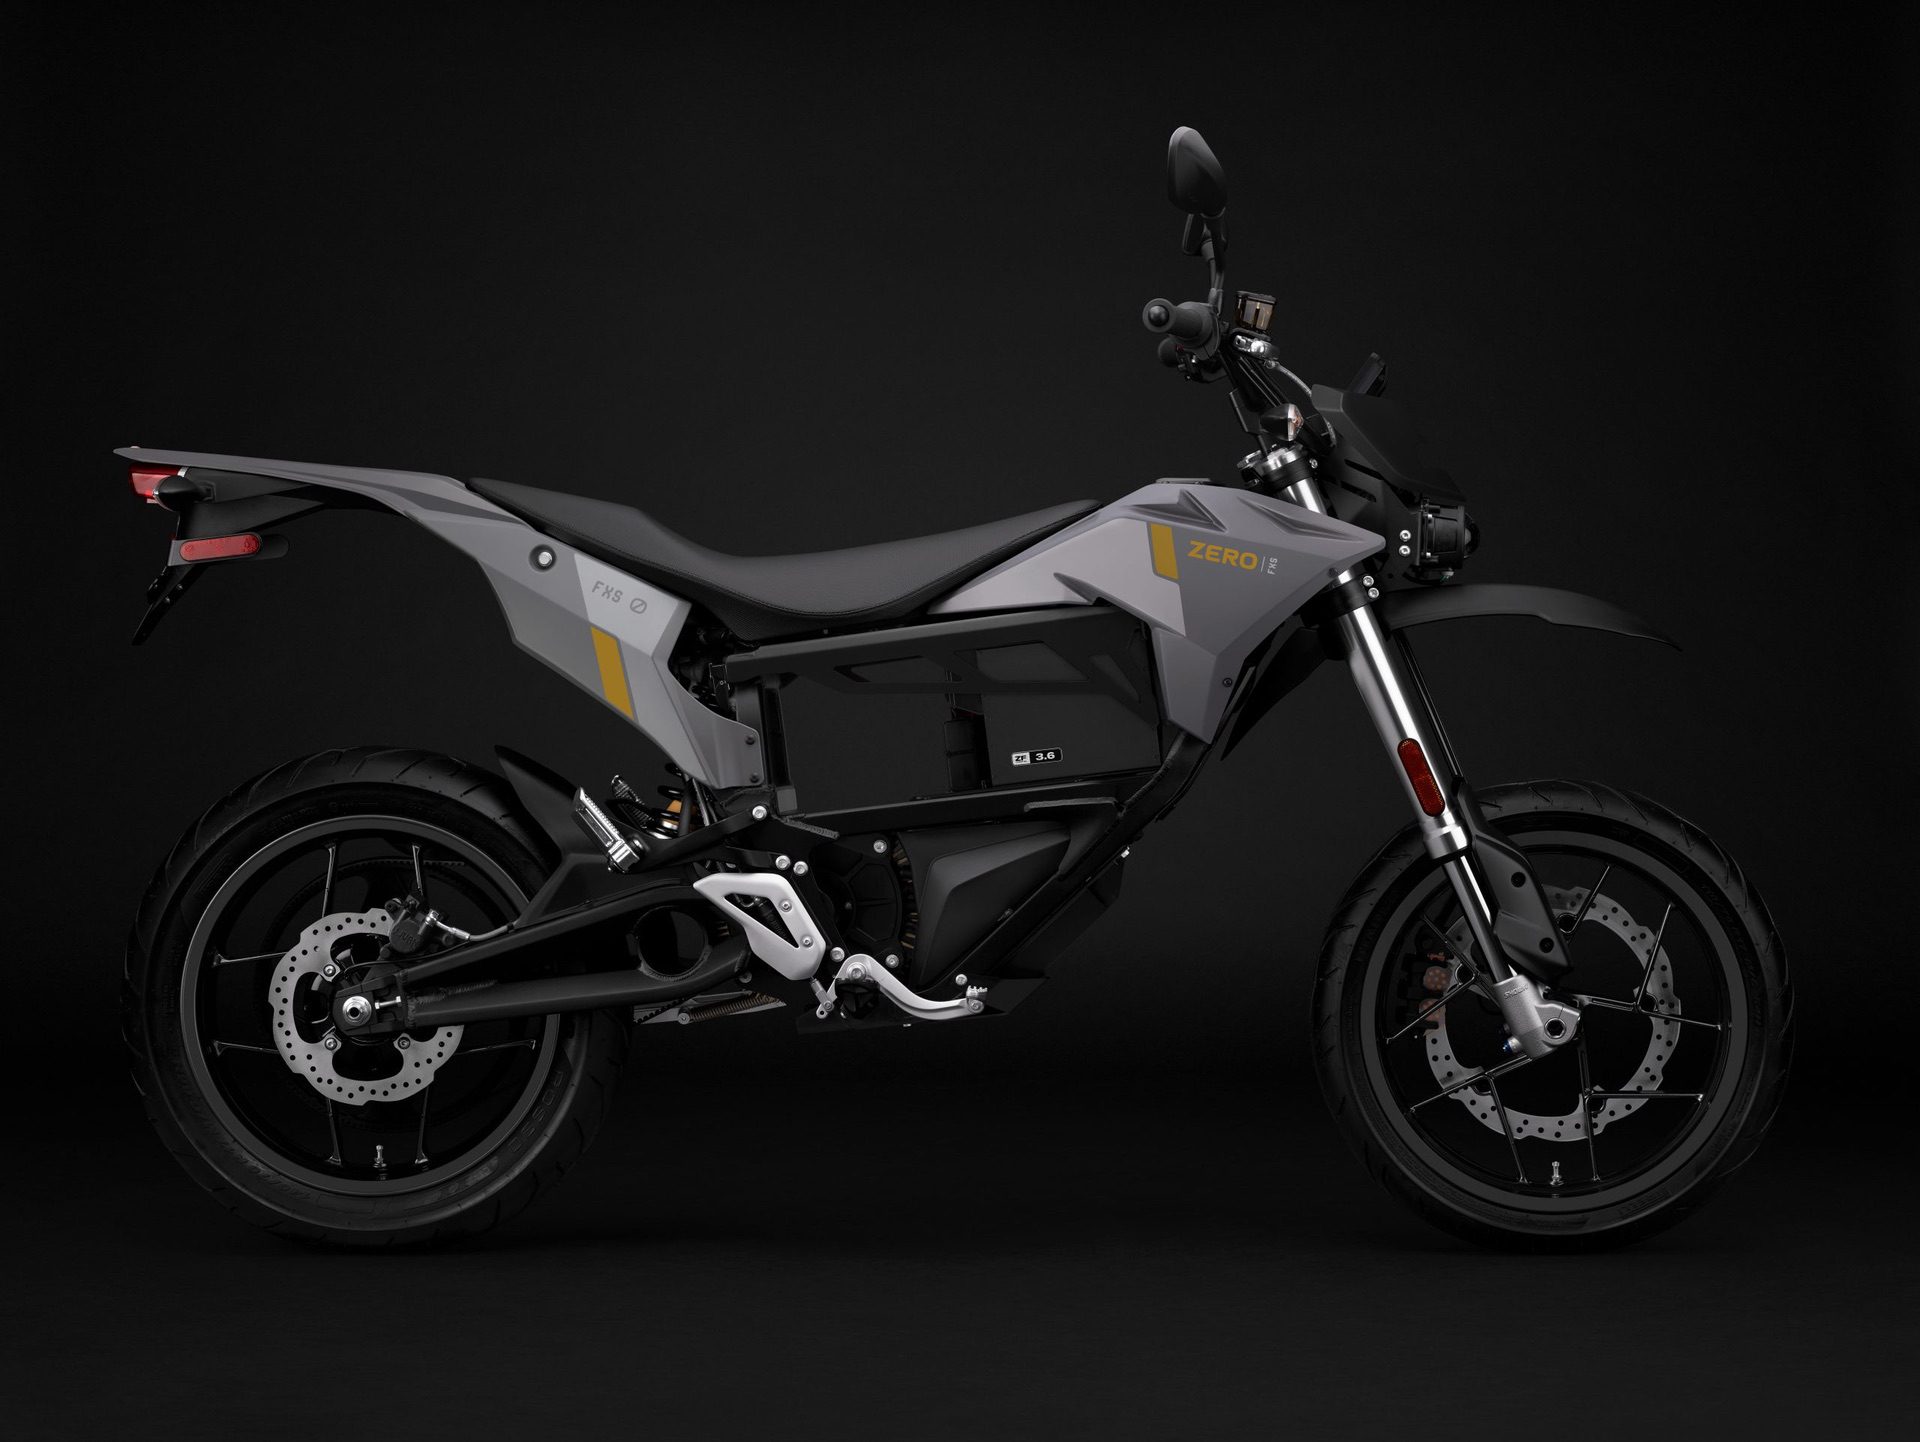 2022 Zero FXS, with its tiny 3.6 kWh battery under where the fuel tank would be